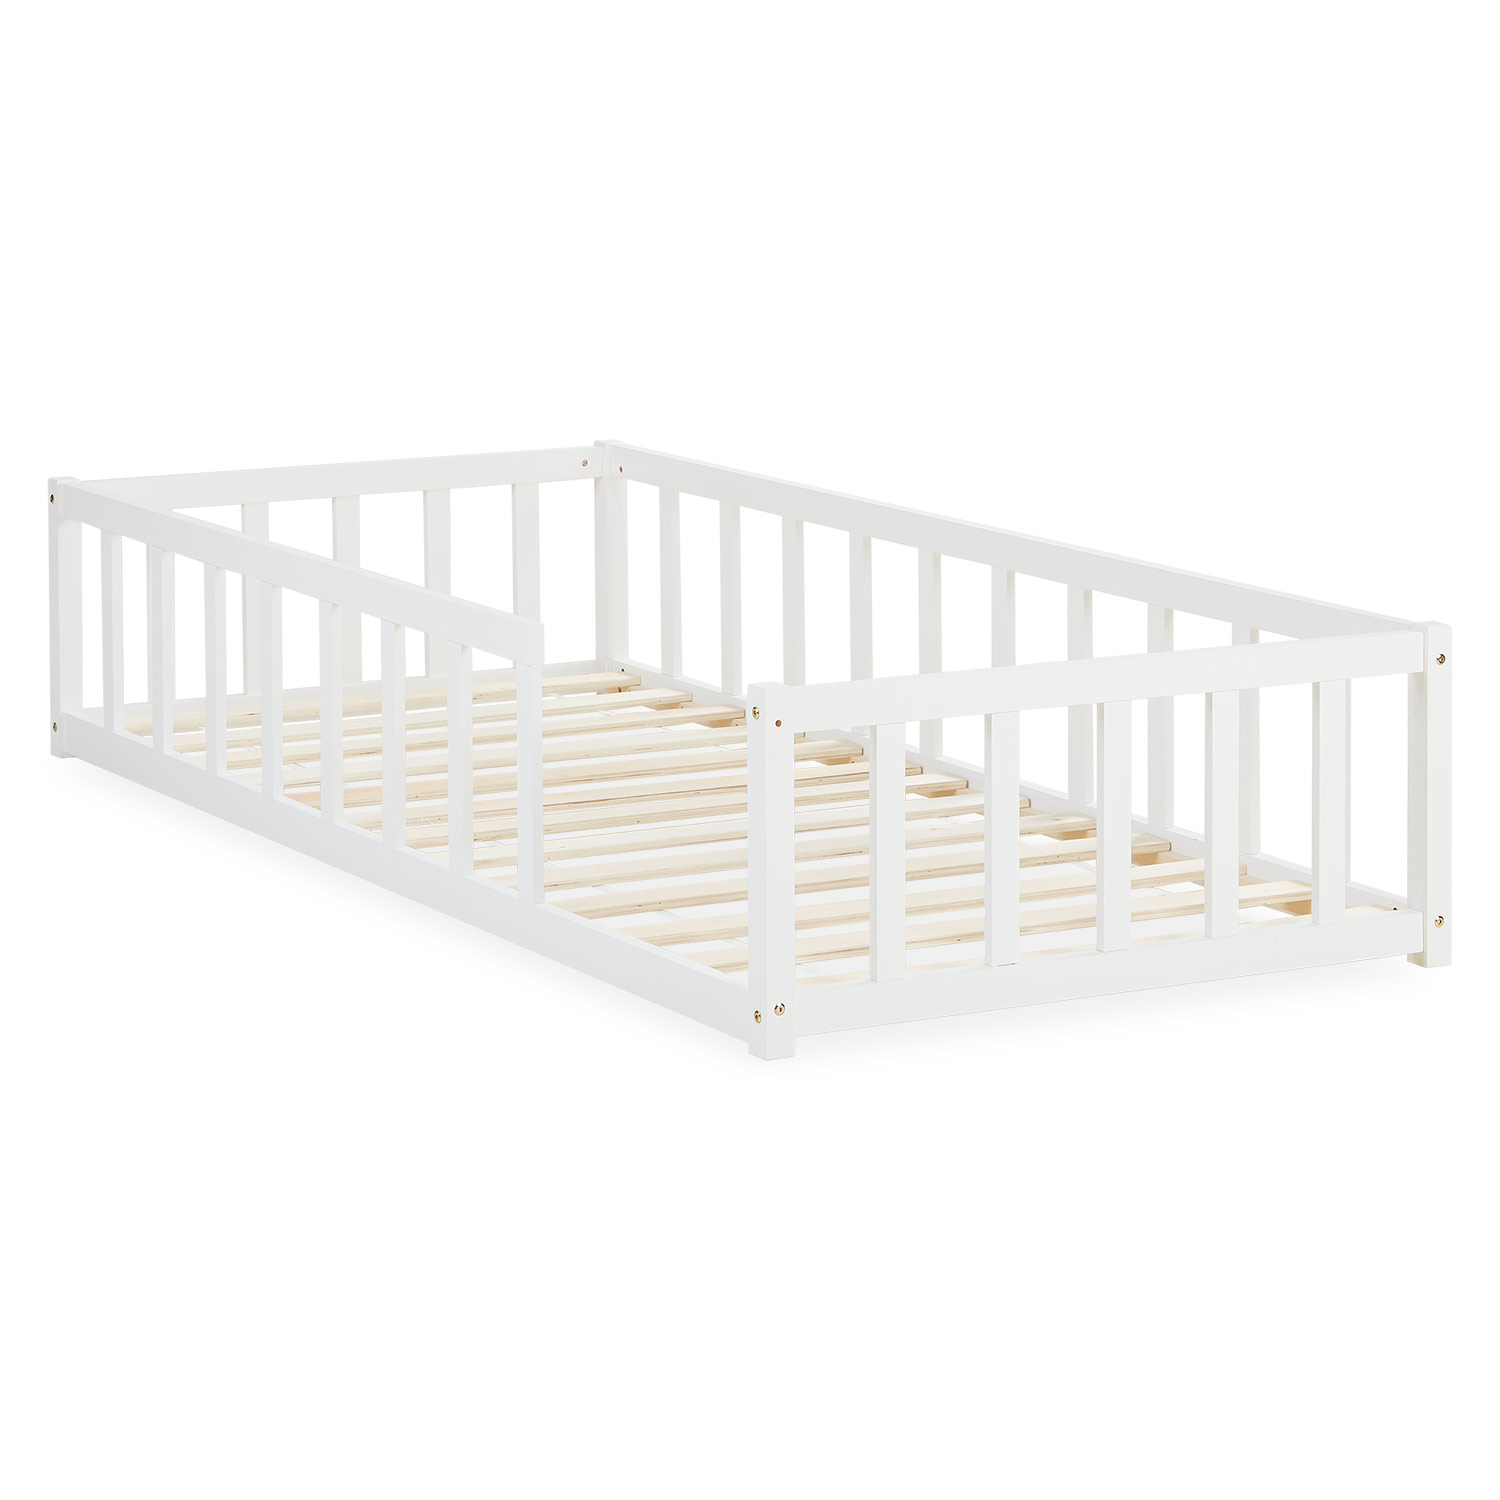 Toddler Floorbed 90x200 cm Montessori Bed with Barriers White Wooden Infant Floor Bed Children's Bed Massif Kids Bed Single Bed